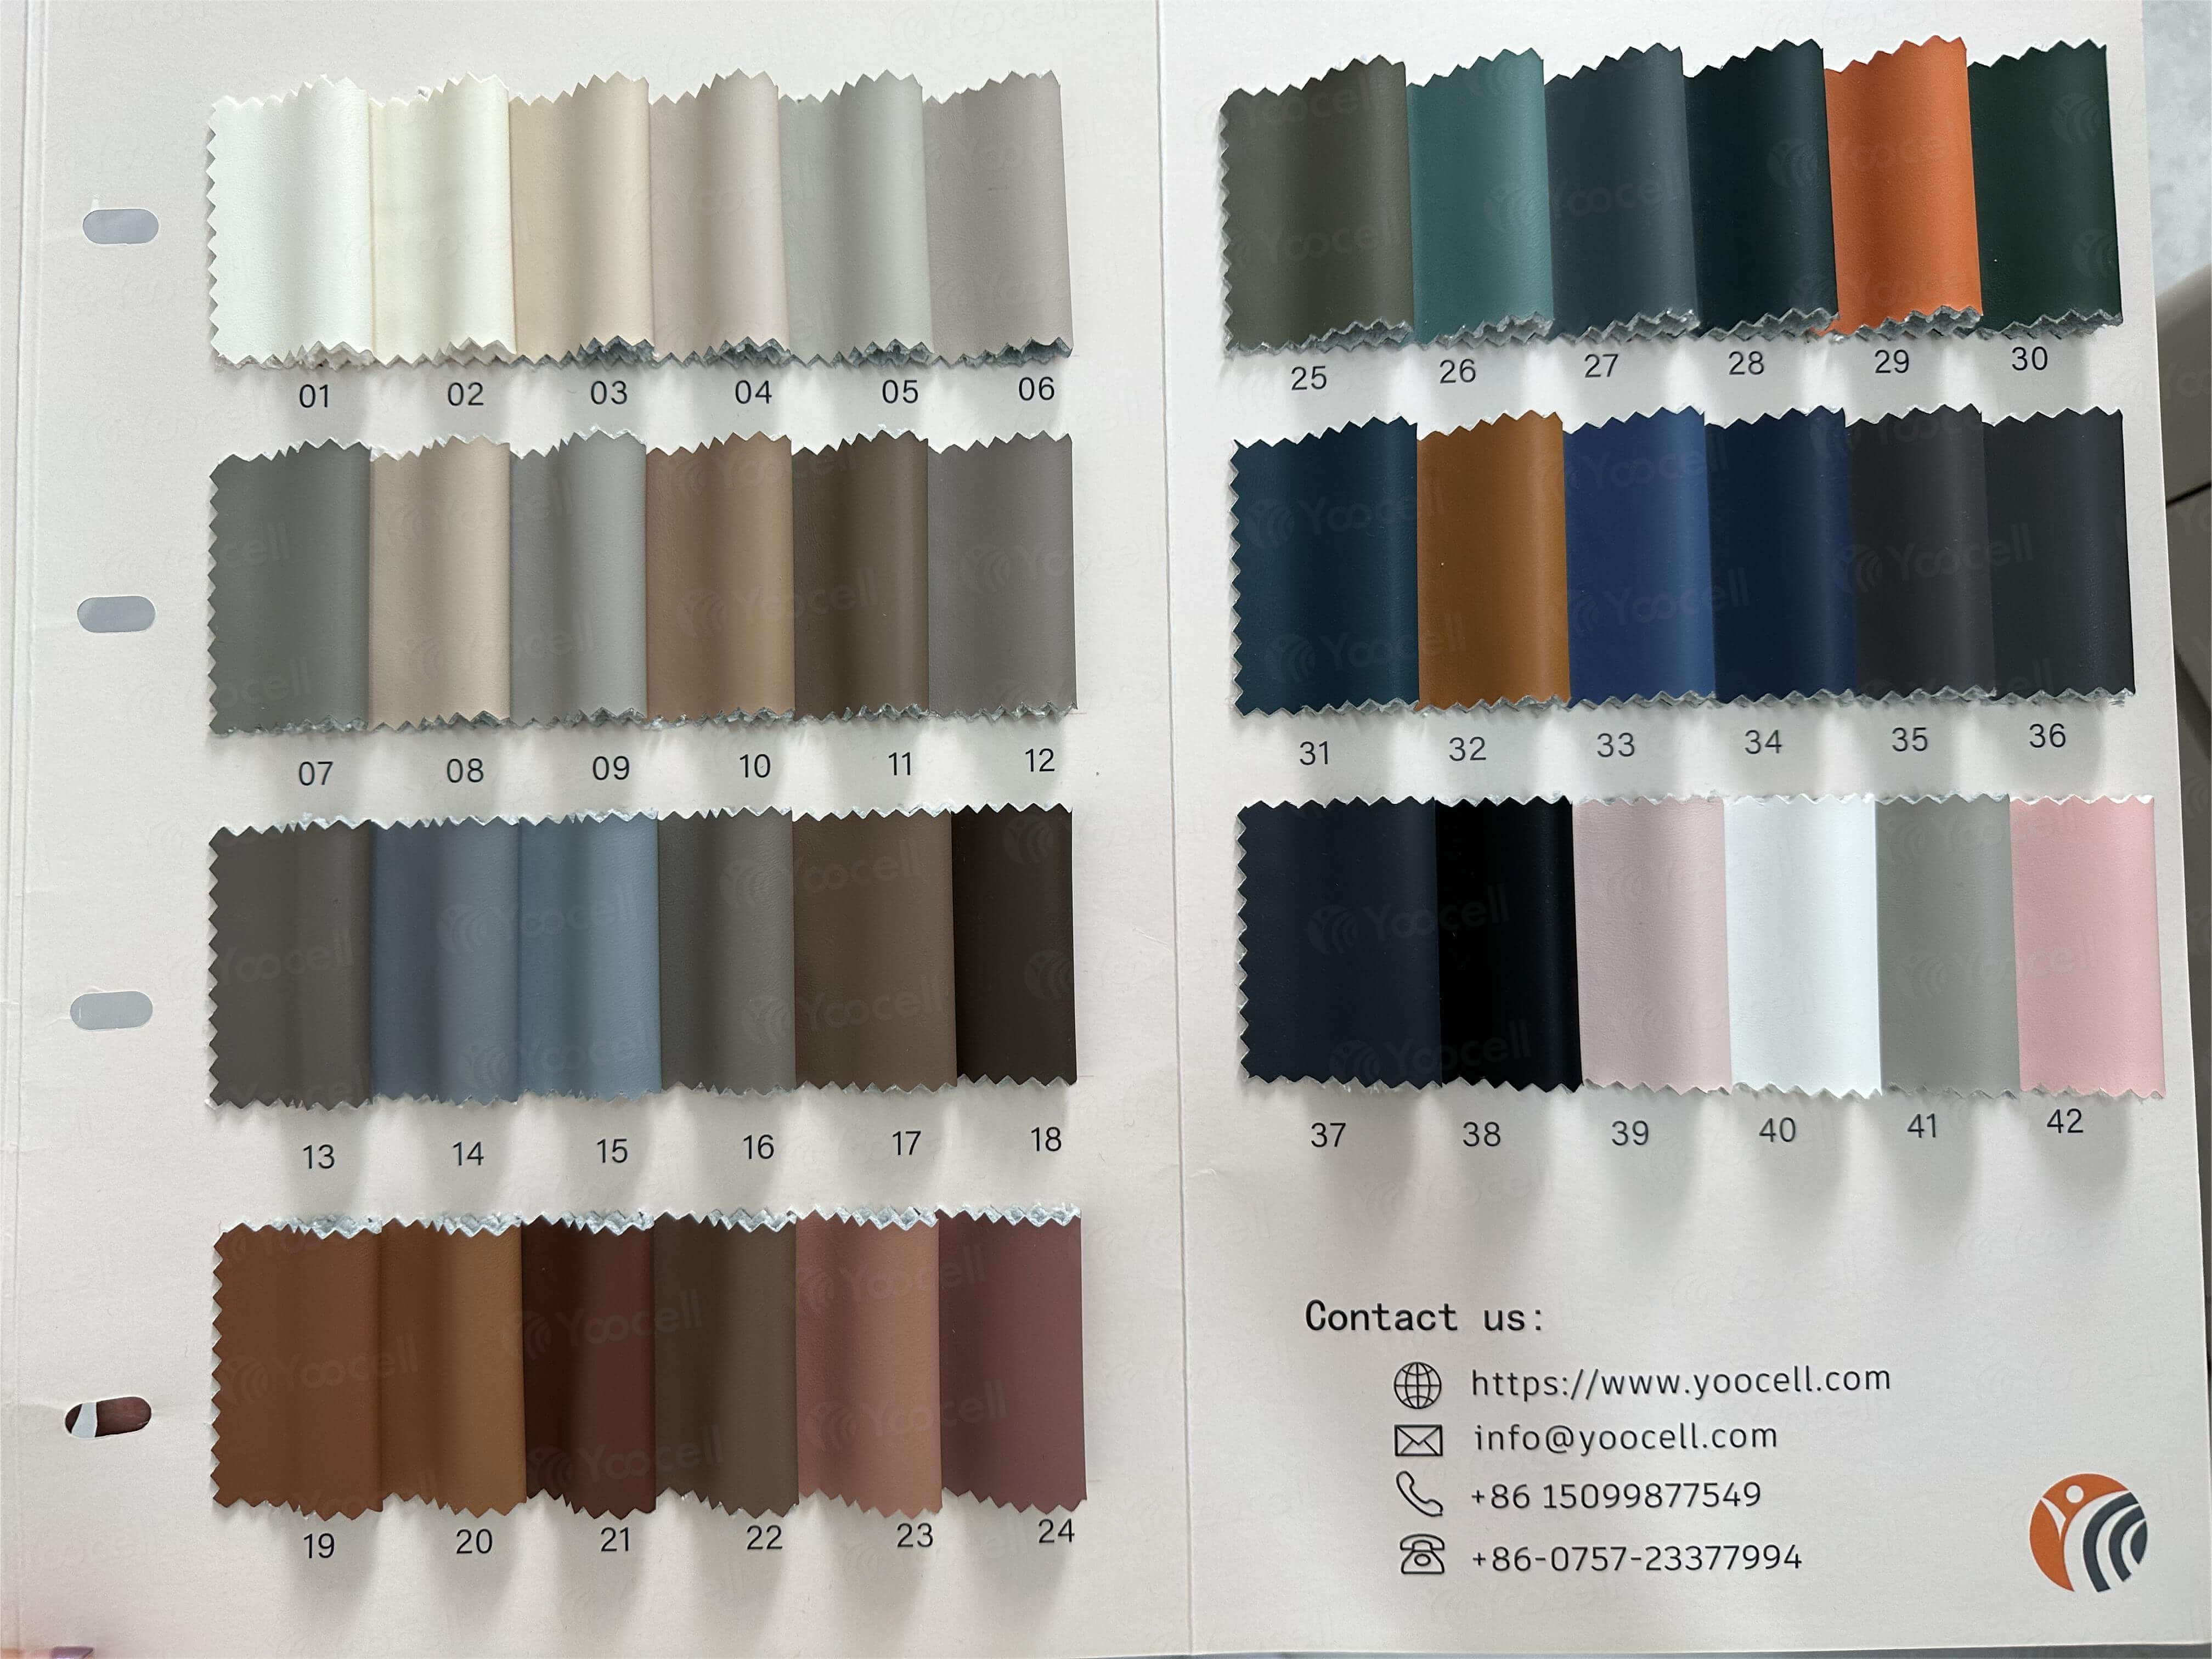 Yoocell leather color swatch for salon furniture